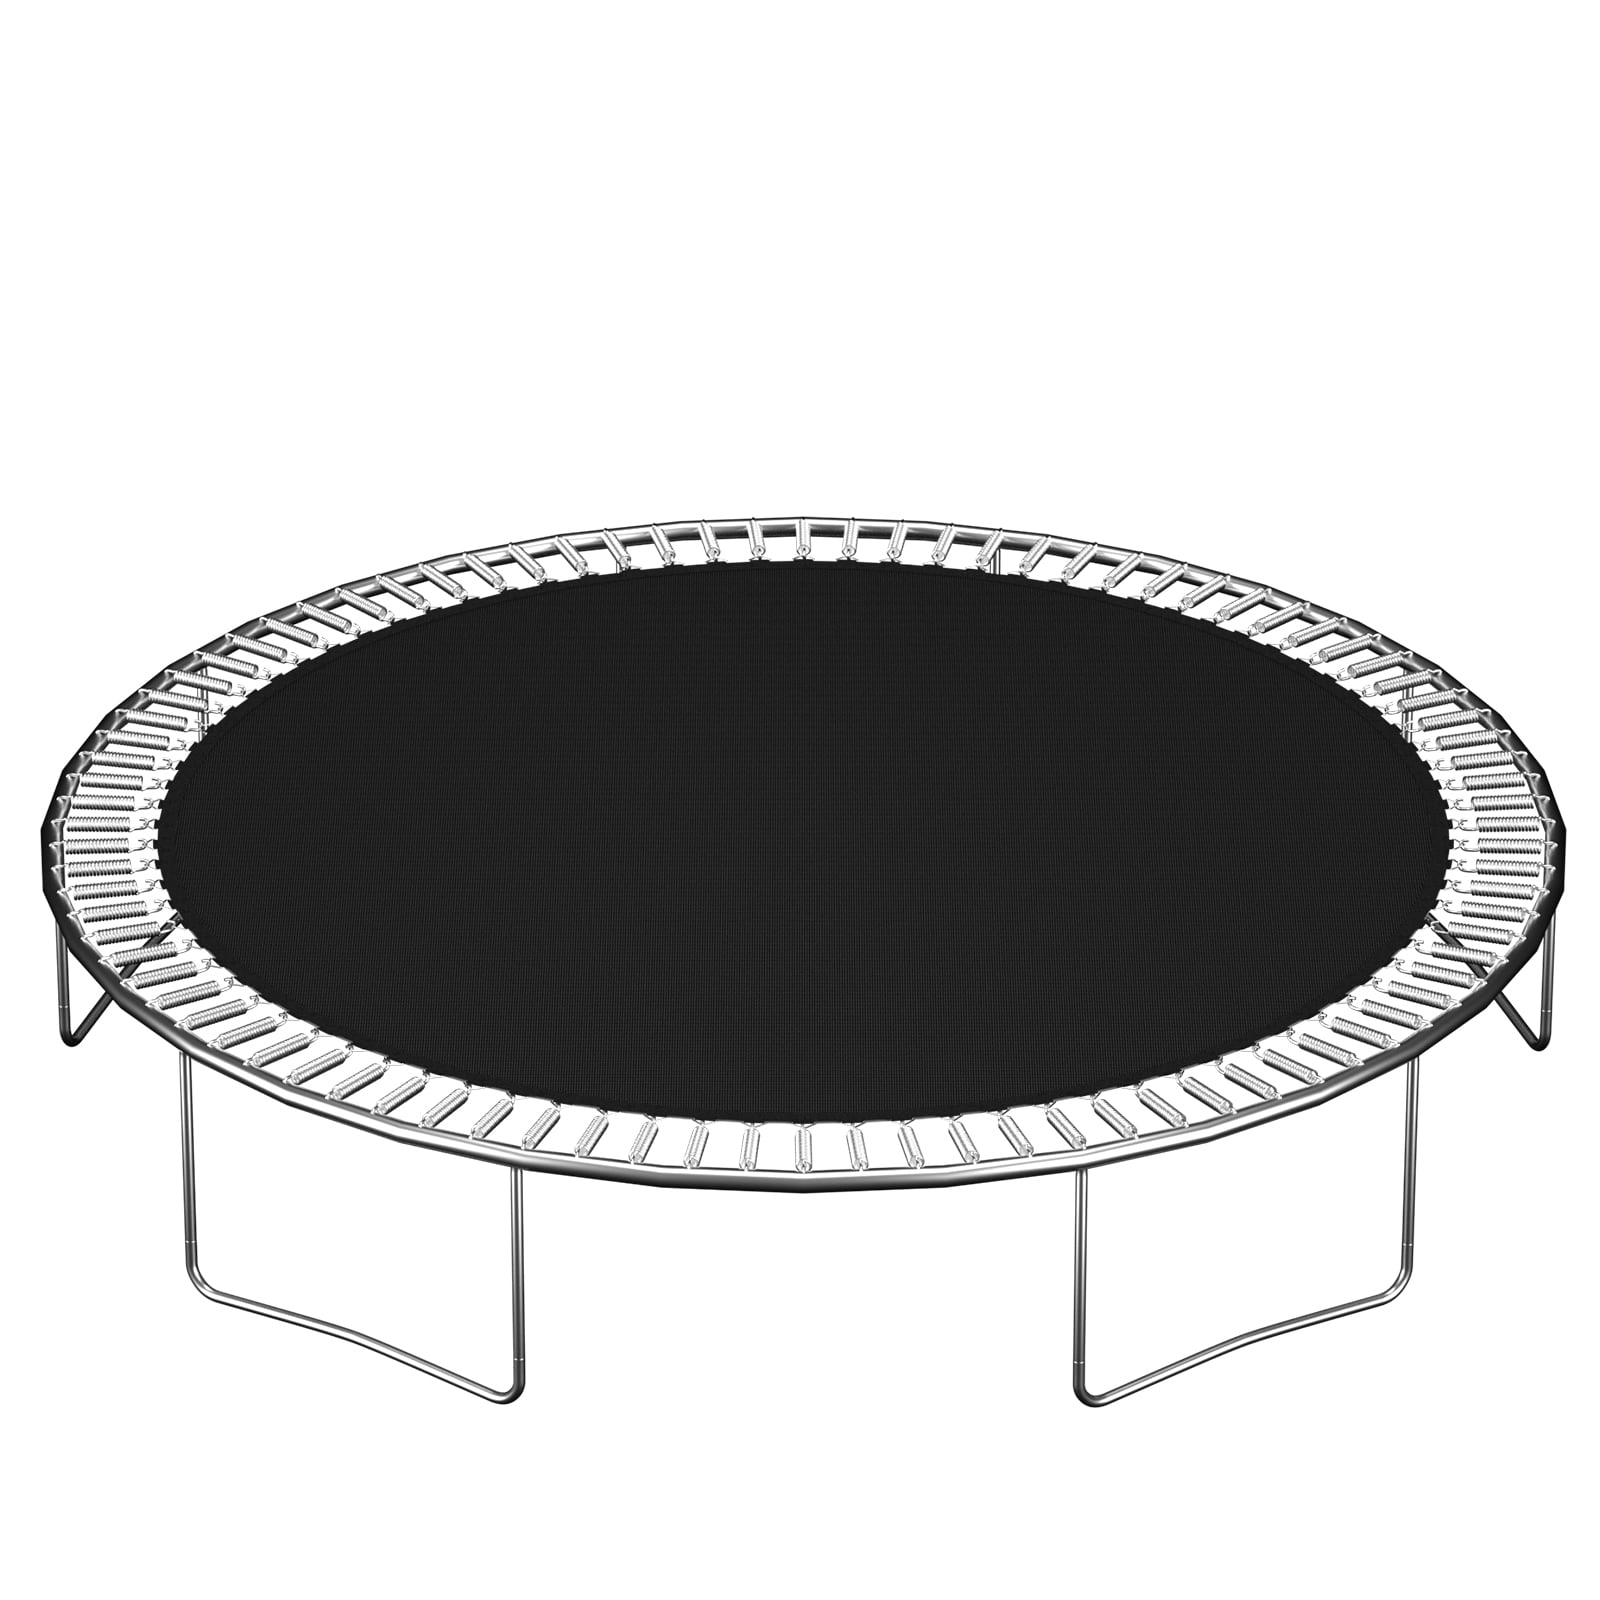 Jumping Surface for 14 Trampolines with 72 V-Rings for 7 Springs 